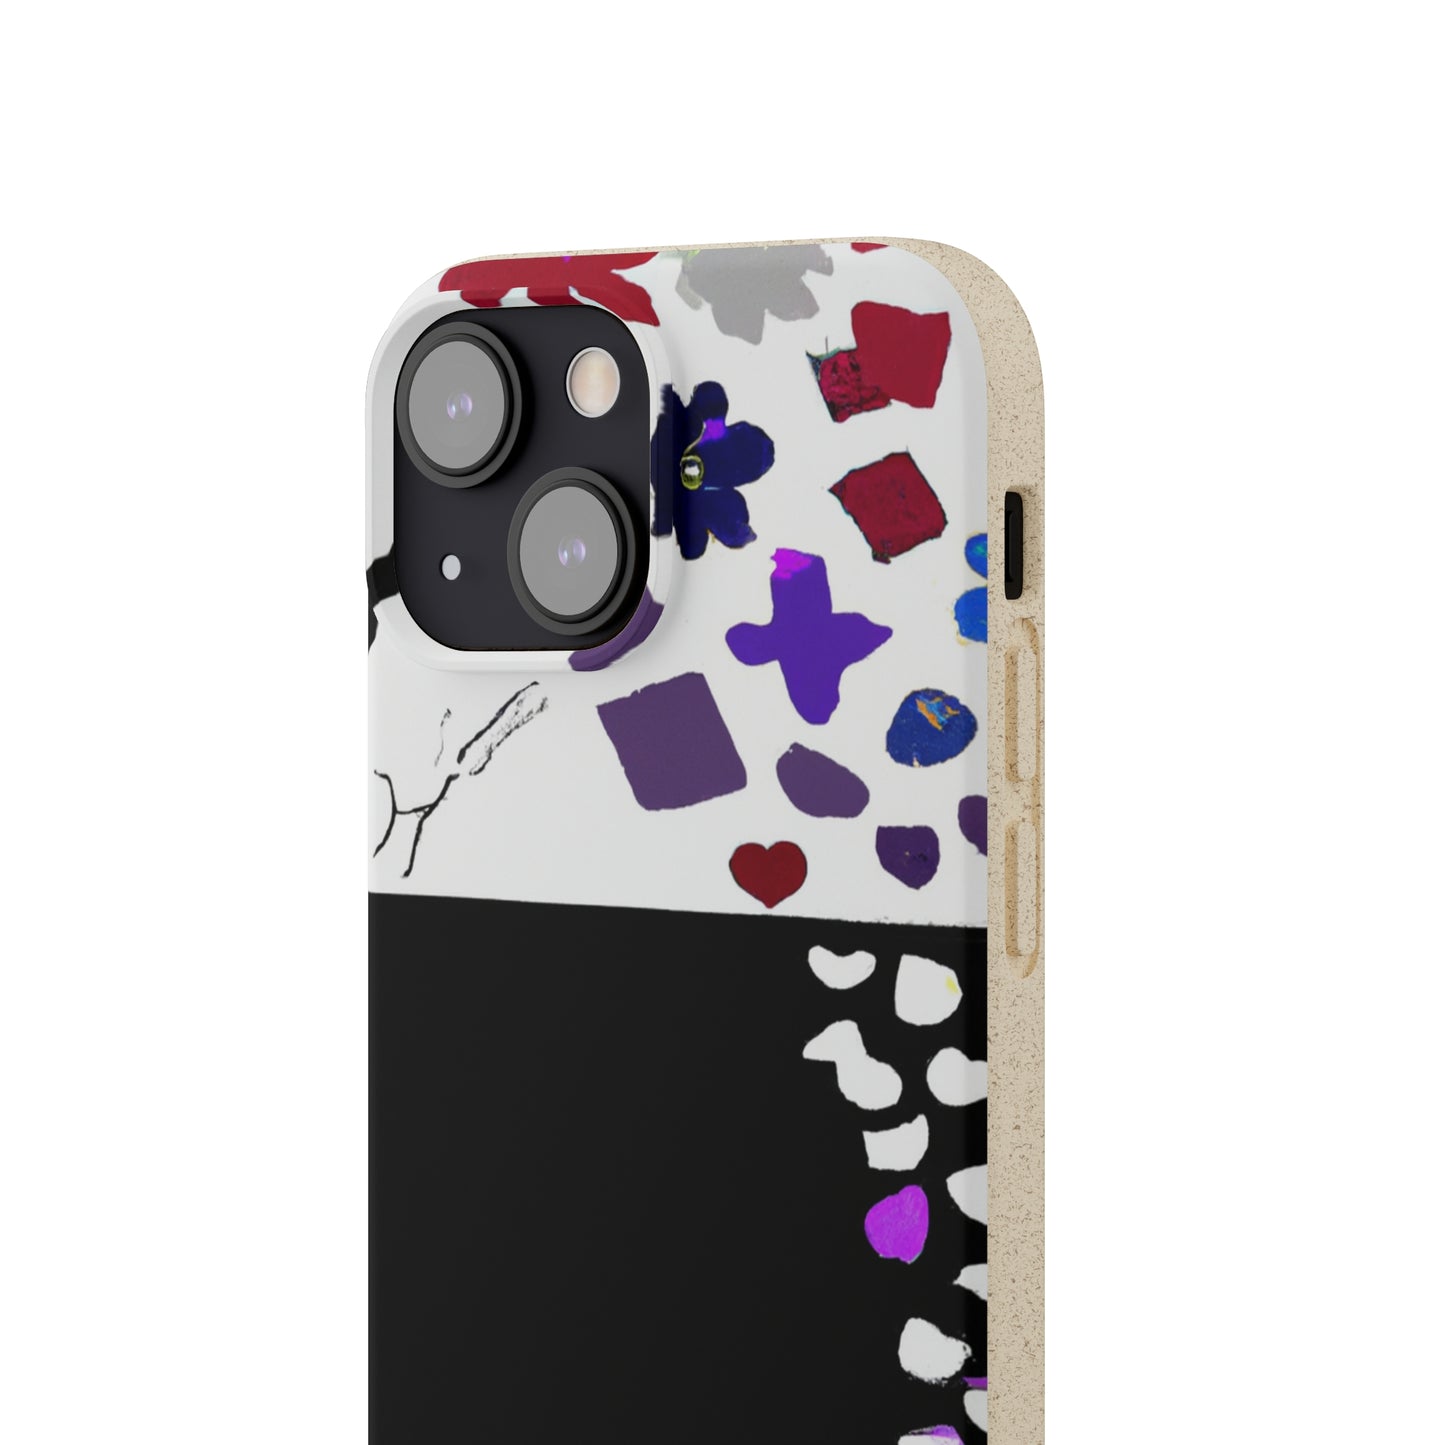 "Unity in Contrast: Exploring Beauty through Creative Collage" - Bam Boo! Lifestyle Eco-friendly Cases